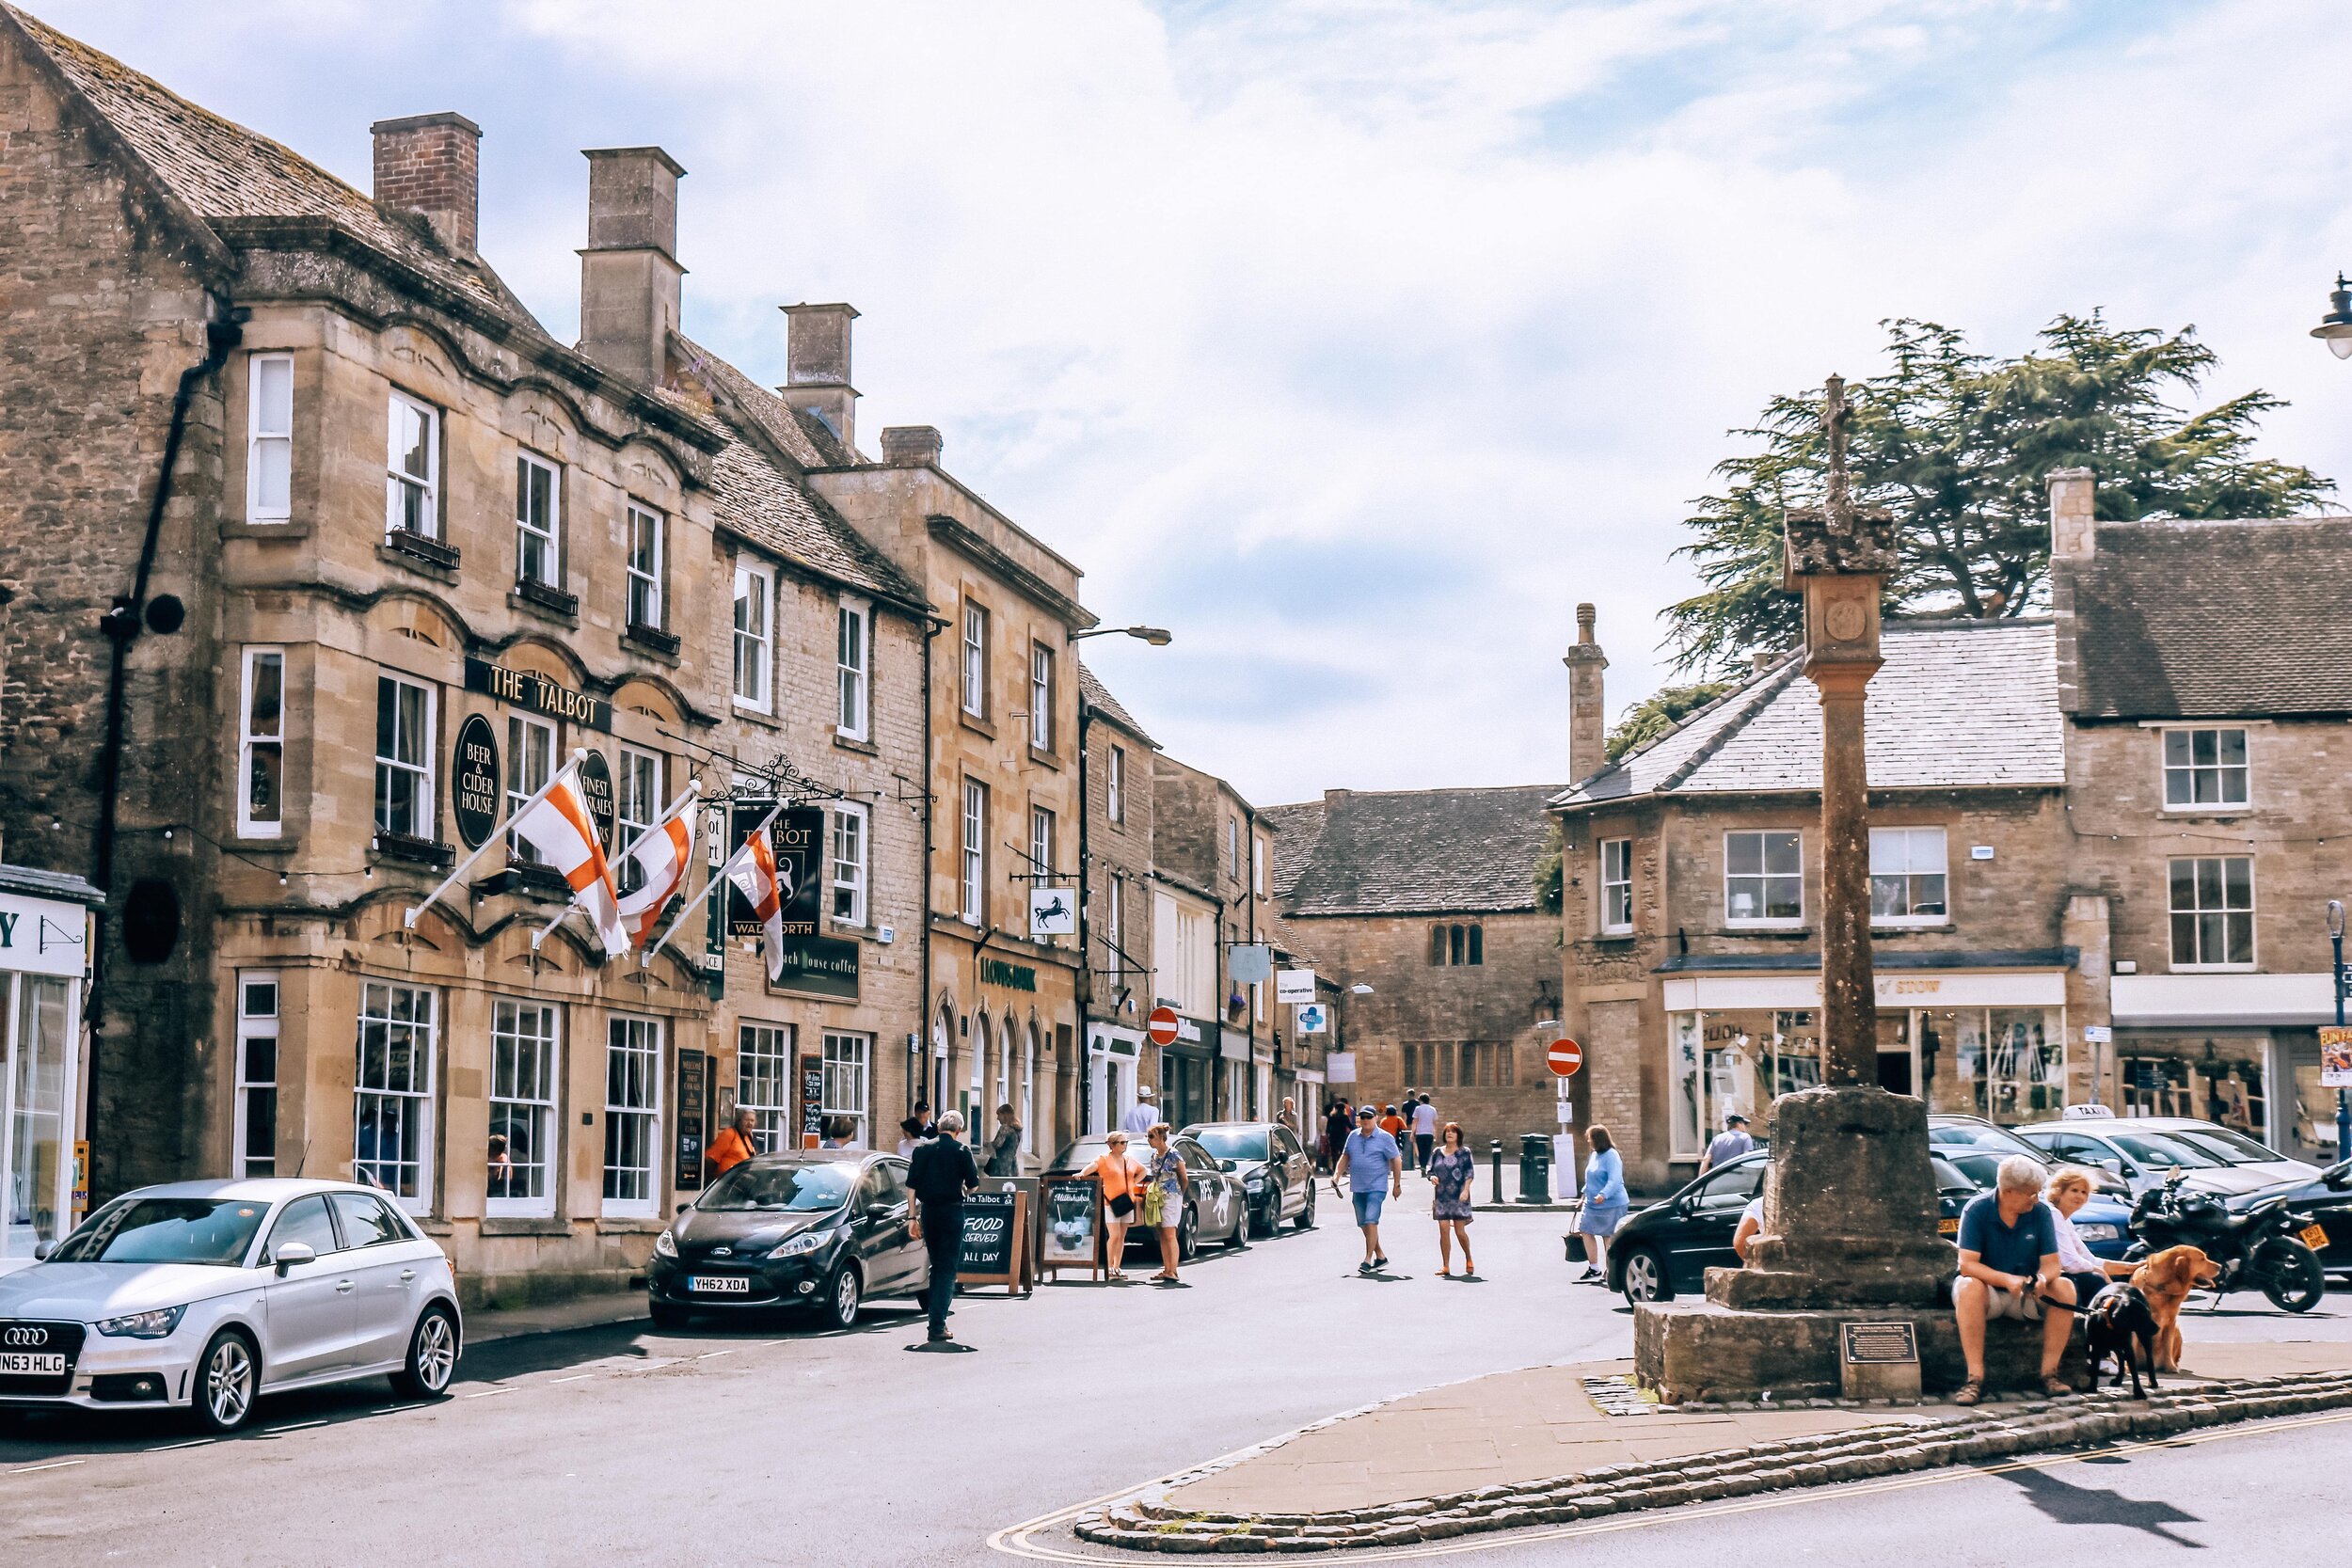 15 beautiful villages to visit in the Cotswolds | Helena Bradbury travel blog | most beautiful cotswolds villages | best villages in the cotswolds | top cotswold villages | best villages to visit in the cotswolds | cotswolds england english countrys…